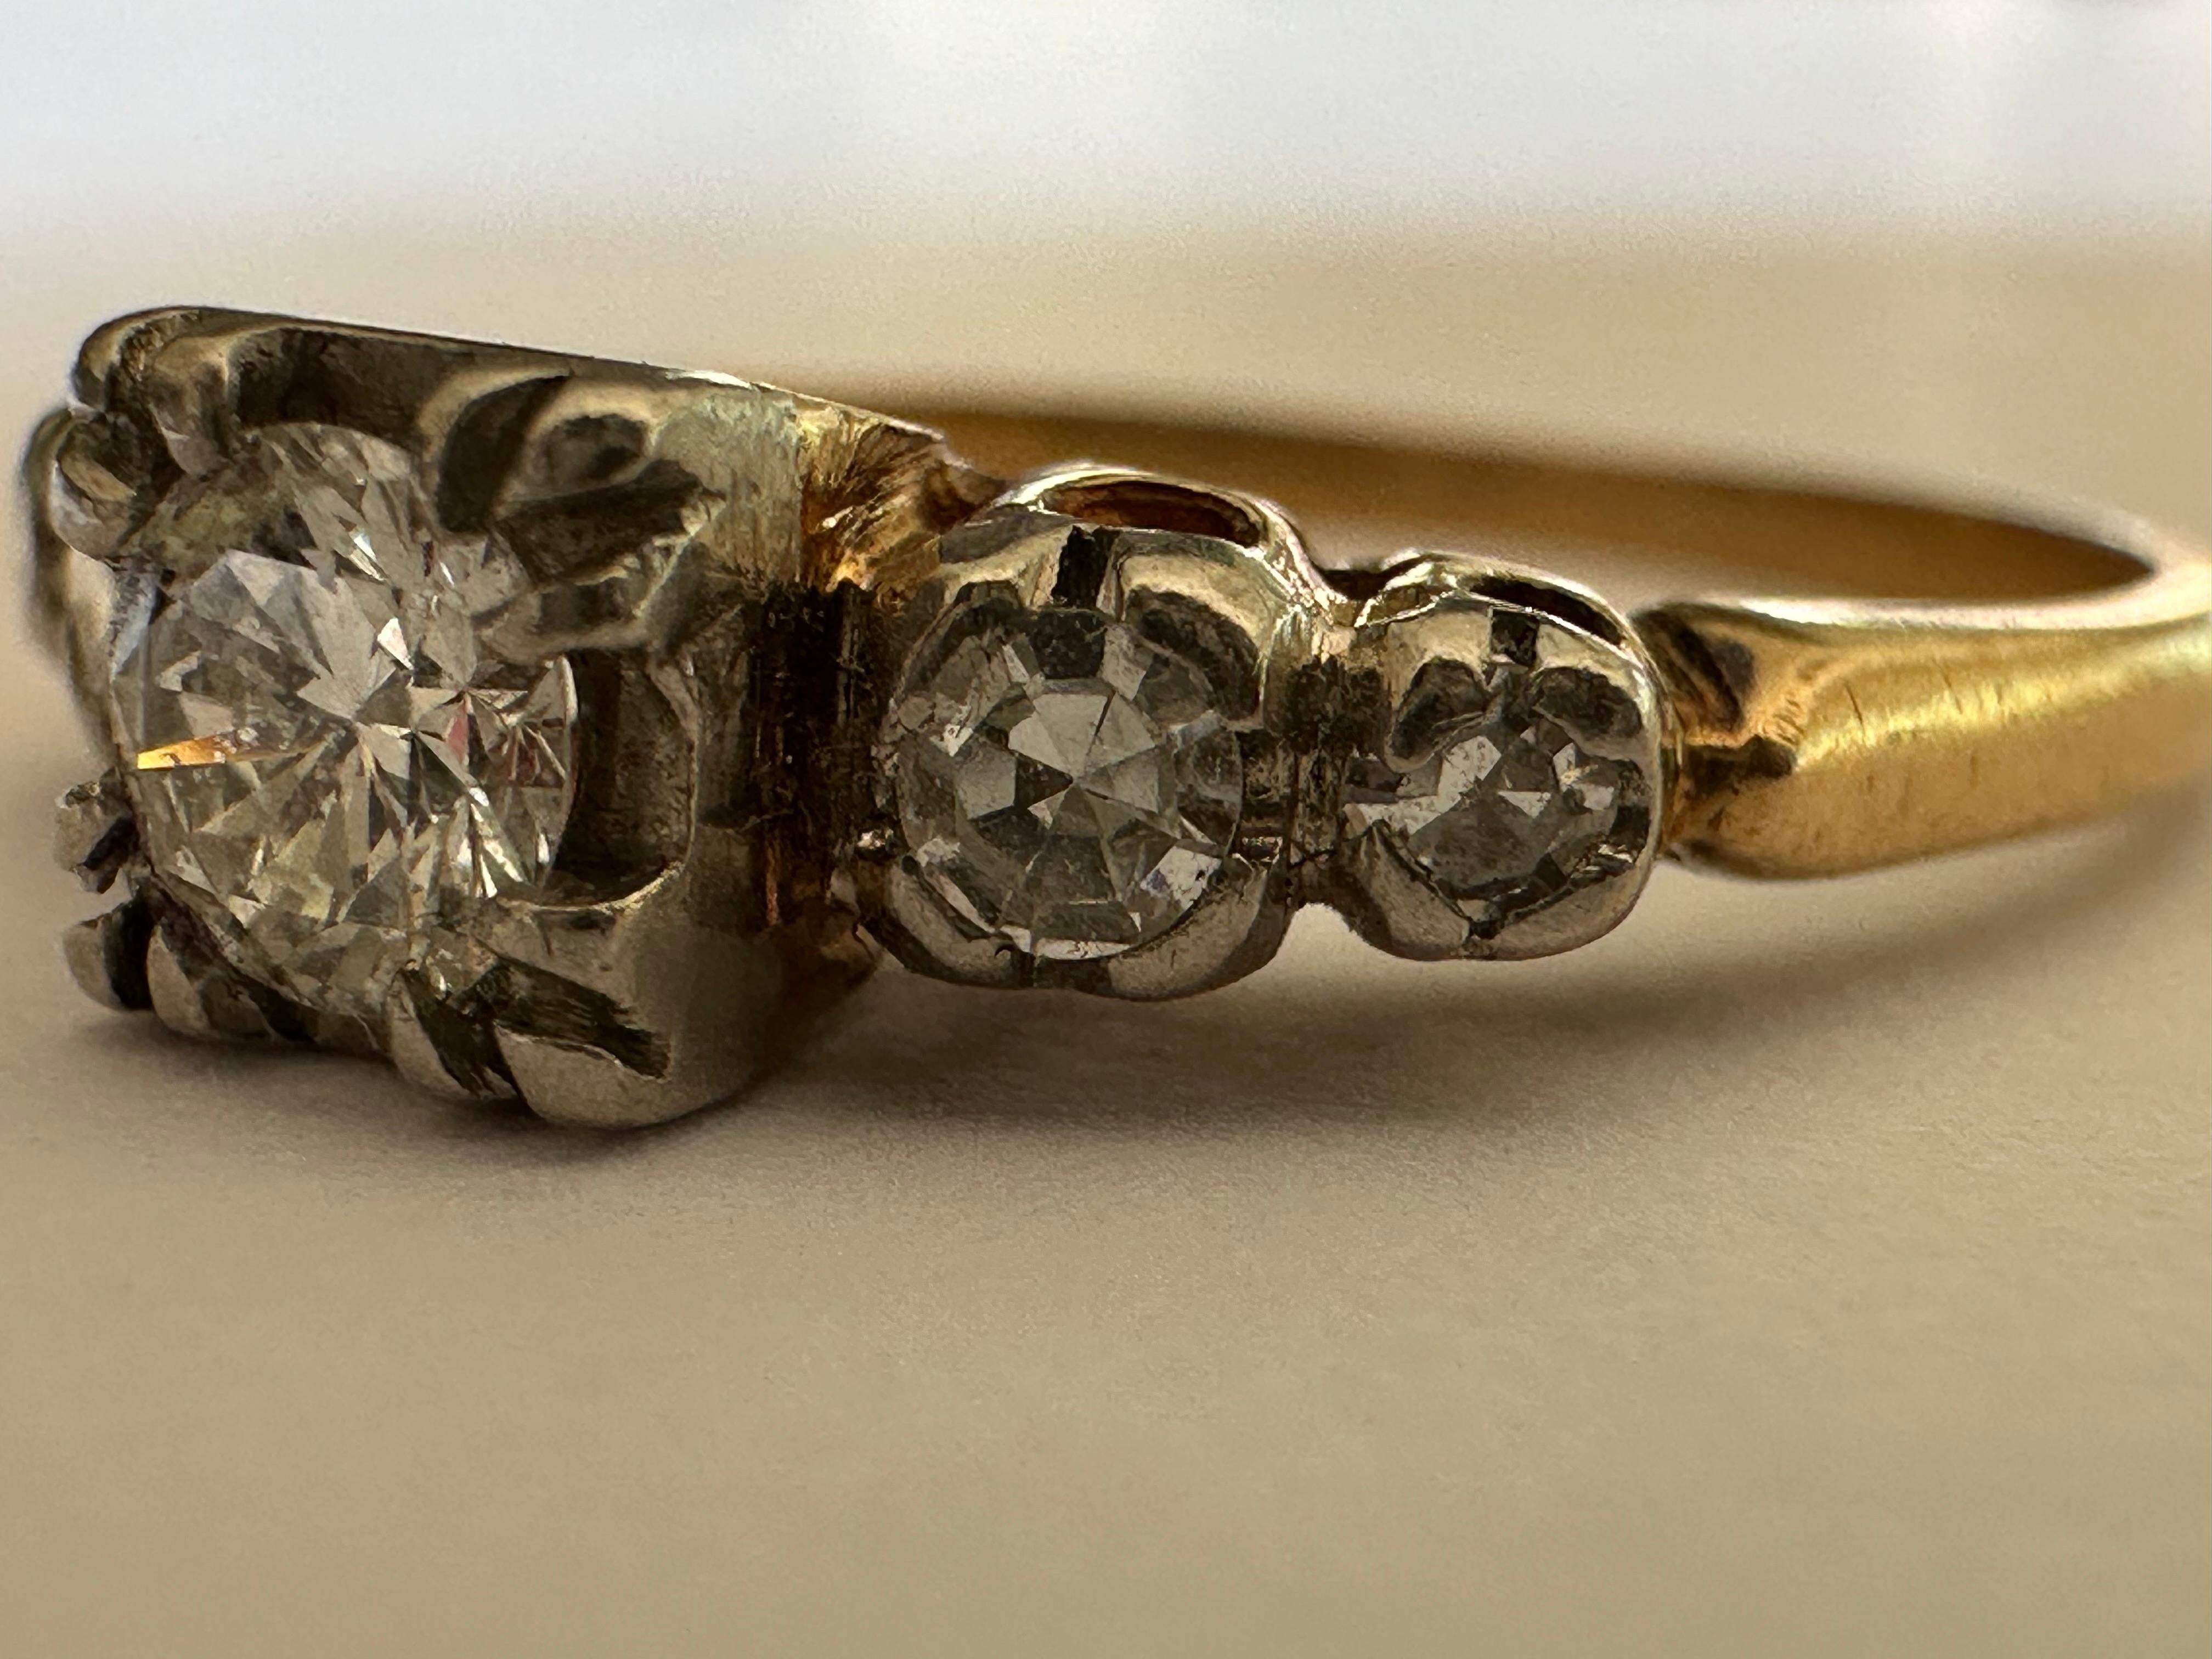 A transitional-cut diamond measuring approximately 0.22 carat, F color SI1 clarity, shines brilliantly at the center of this vintage mid-century ring accented with four single cut diamonds, two on each side. Set in two-tone 14K white and yellow